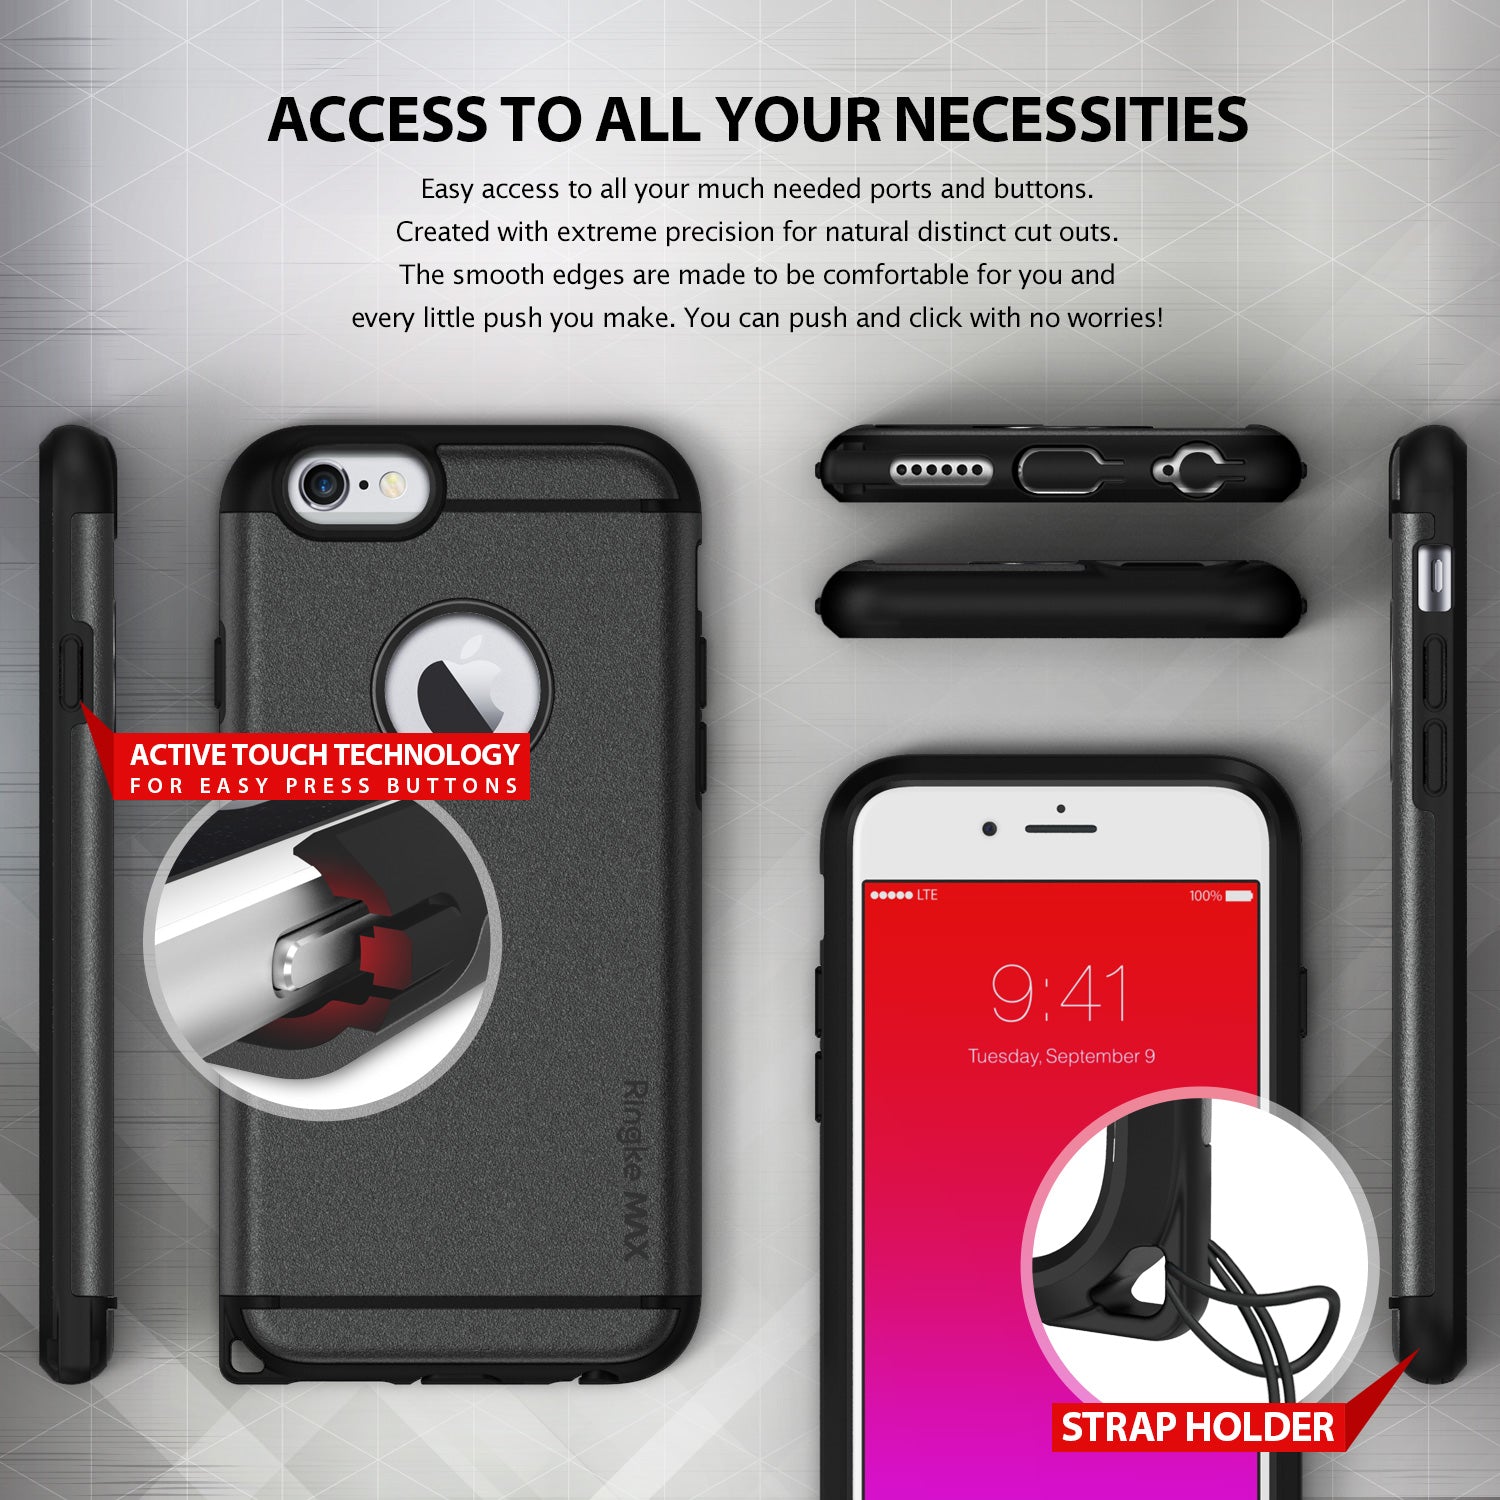 Galaxy S6 Plus Case | Max - Access to all your necessities